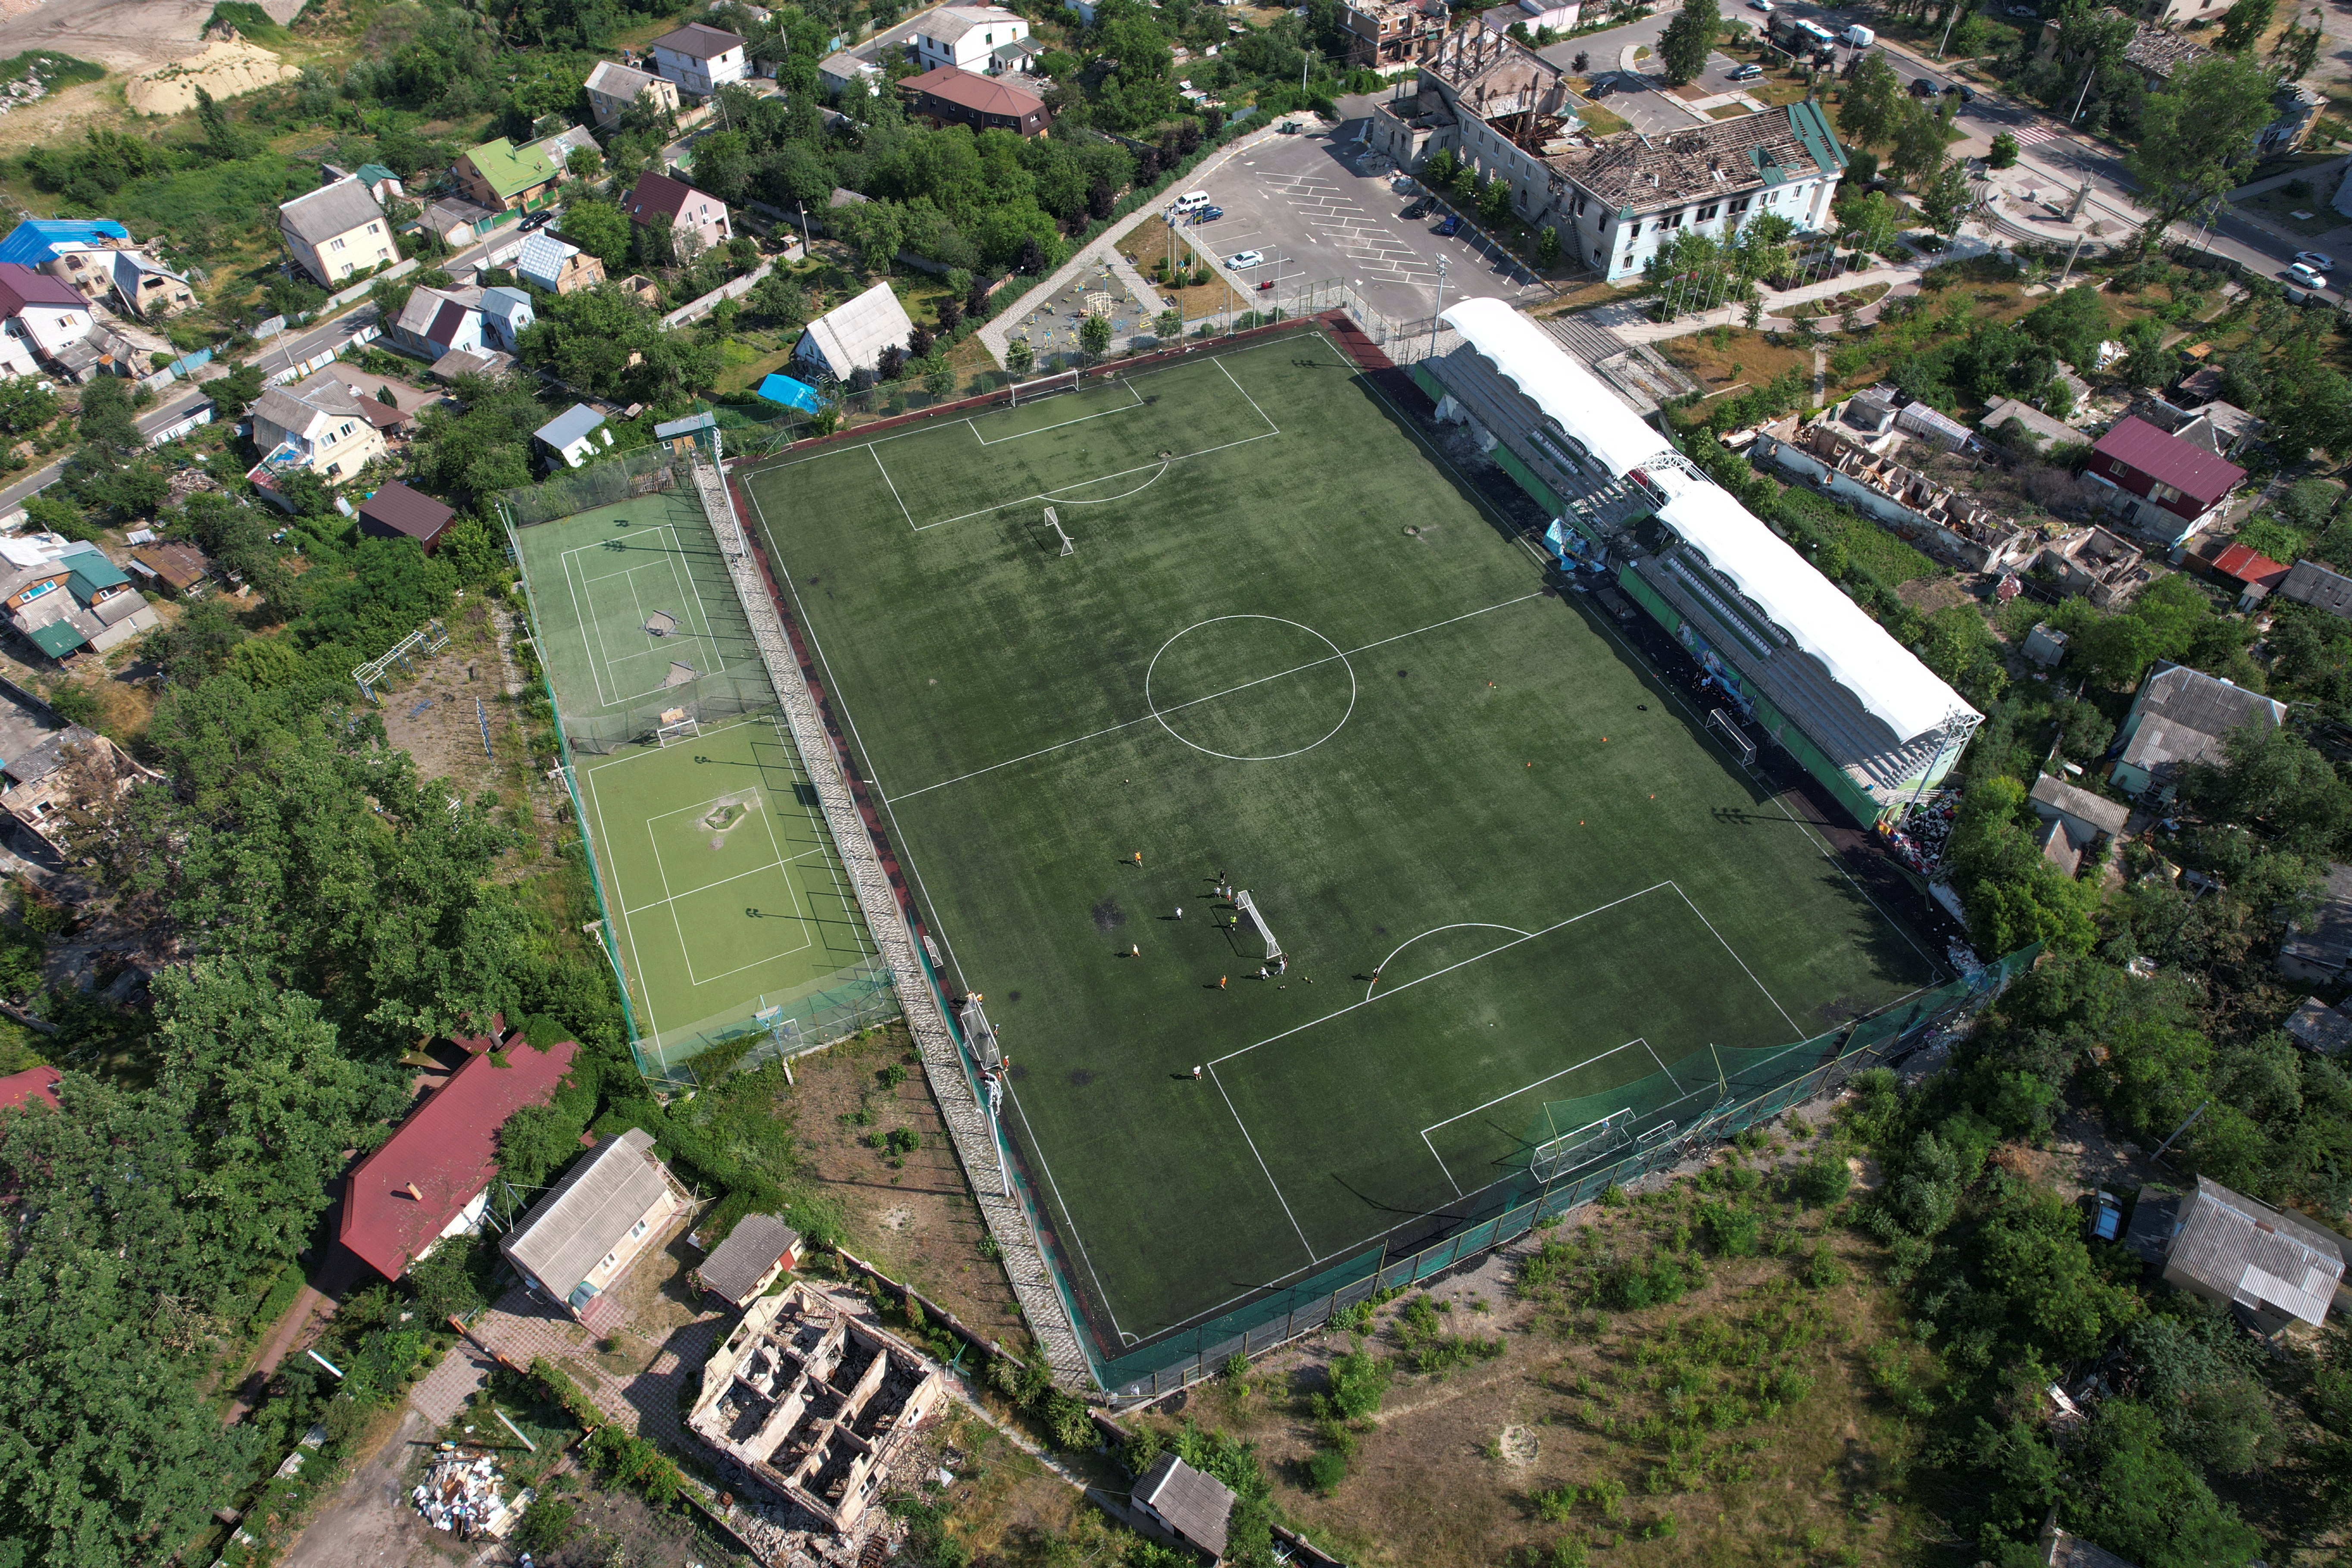 An aerial view shows the Central stadium in the town of Irpin